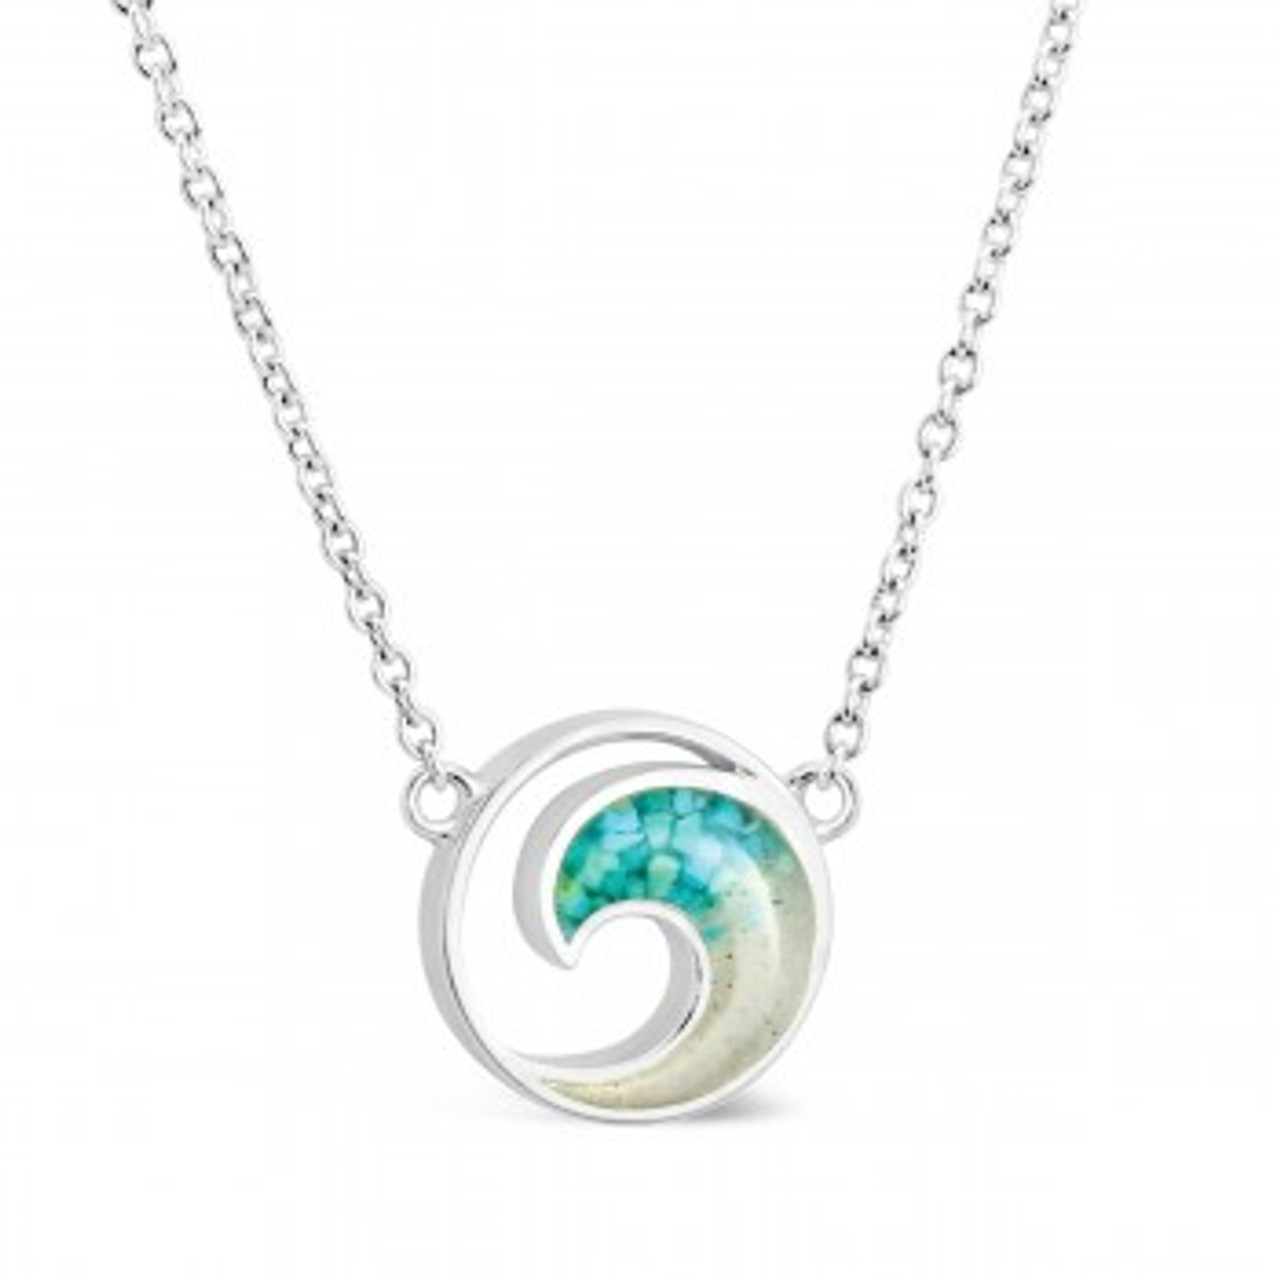 ShanOre Sterling Silver Wave Necklace 002-640-17590 | Dickinson Jewelers |  Dunkirk, MD